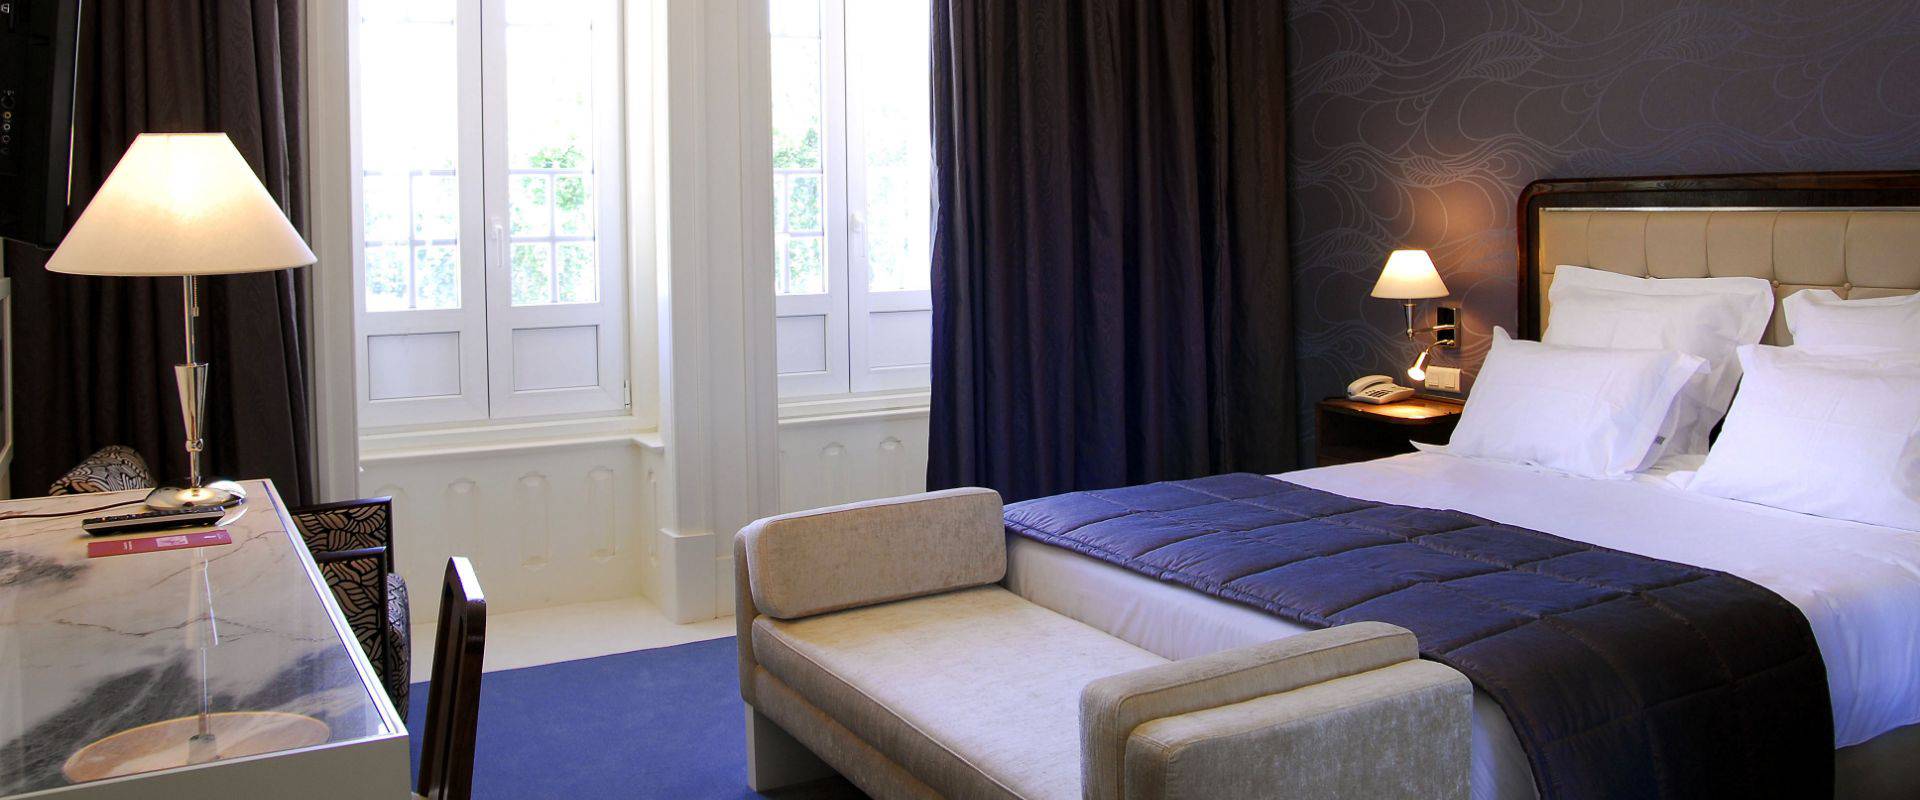 Classic room with an individual bed and exterior view  Curia Palace Hotel Coimbra